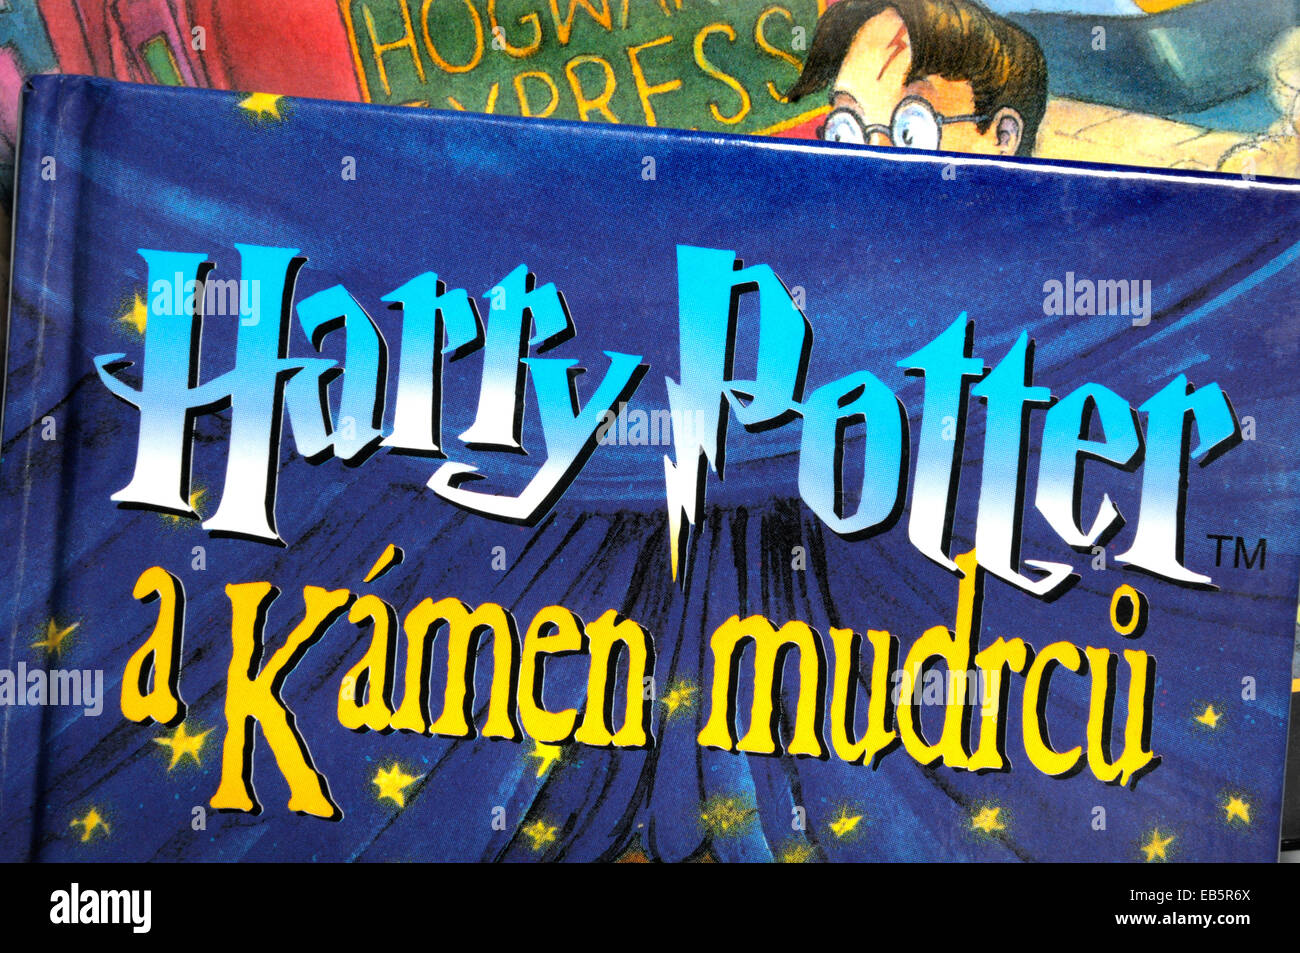 Harry Potter and the Philosopher's Stone - Czech edition Stock Photo